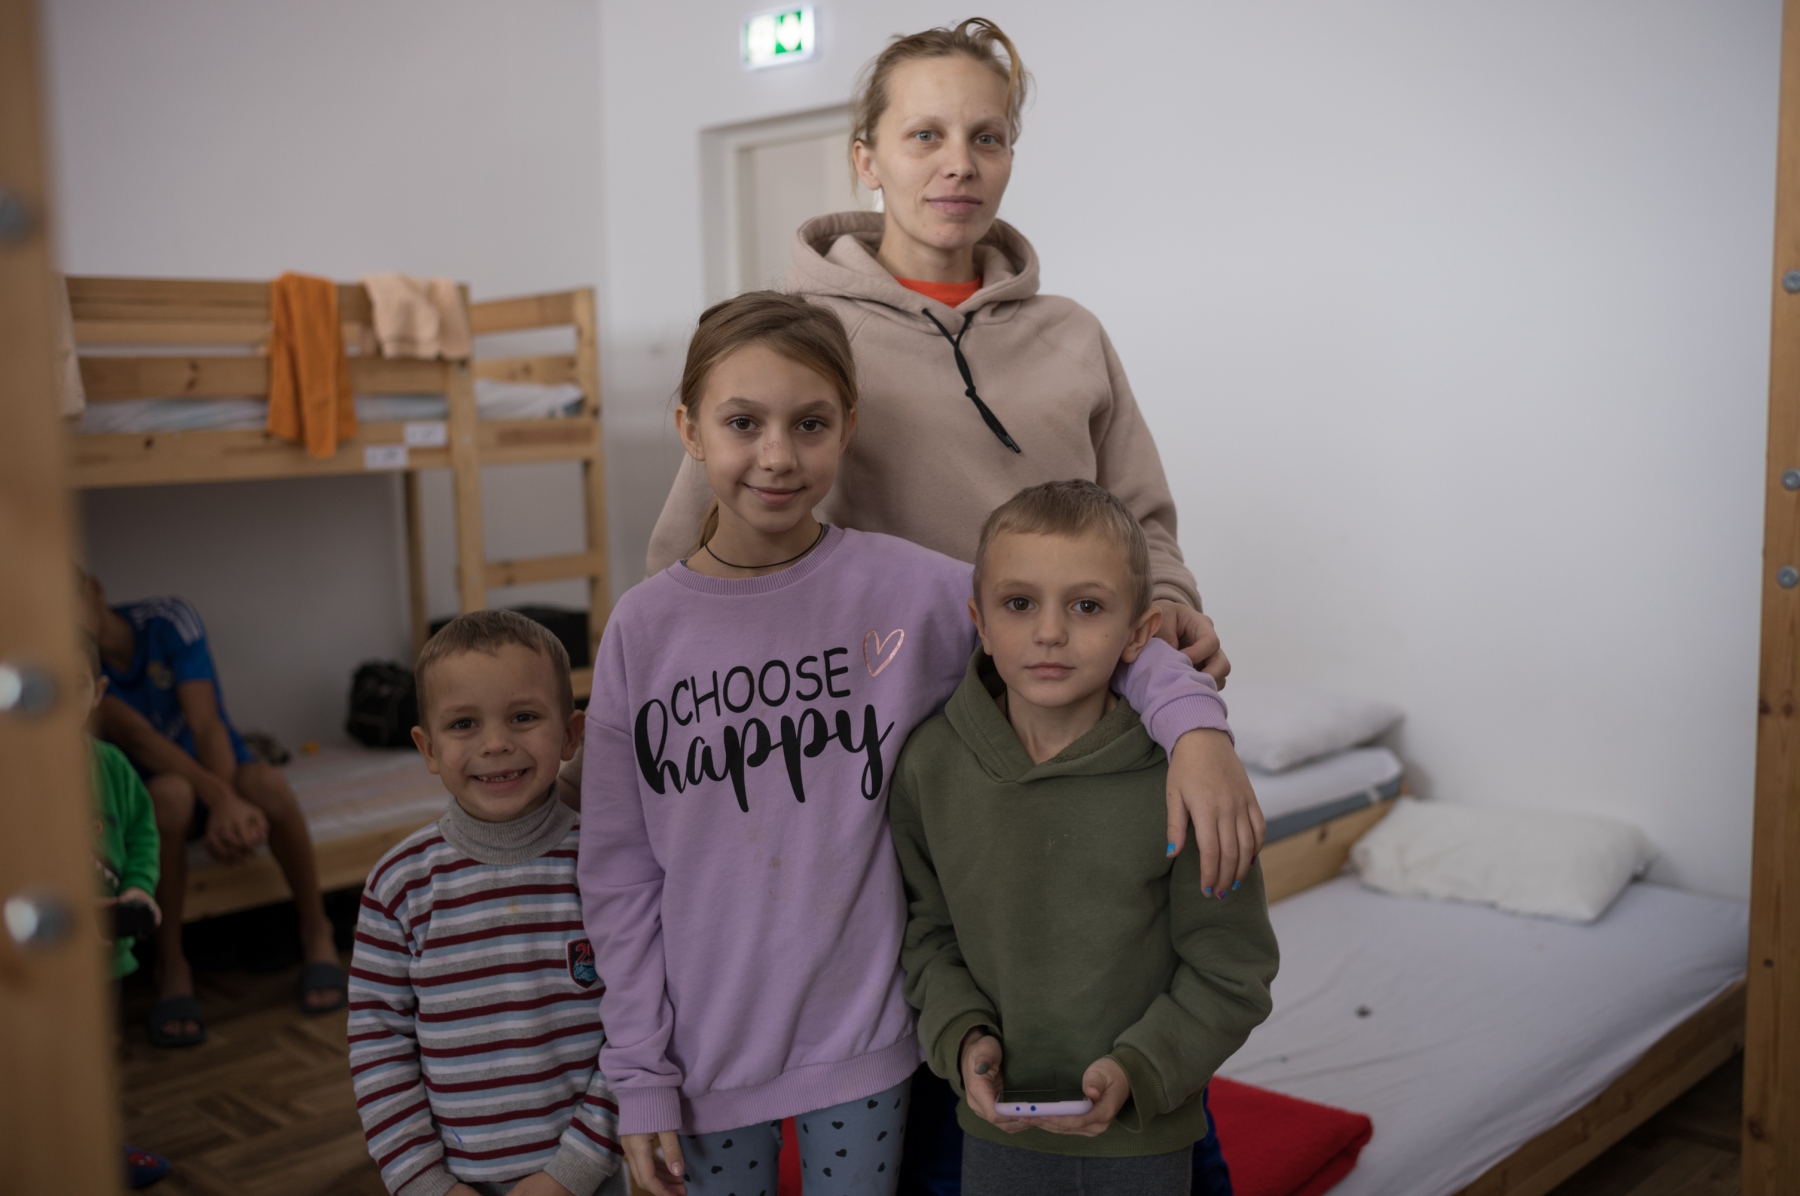 Alona arrived to Przemyśl together with her 3 kids. She stayed in the hostel to rest before her next travel. This hostel is managed by the Ukrainian Union in Poland and PAH. Photo by Agata Grzybowska / PAH. (11.12.2023)